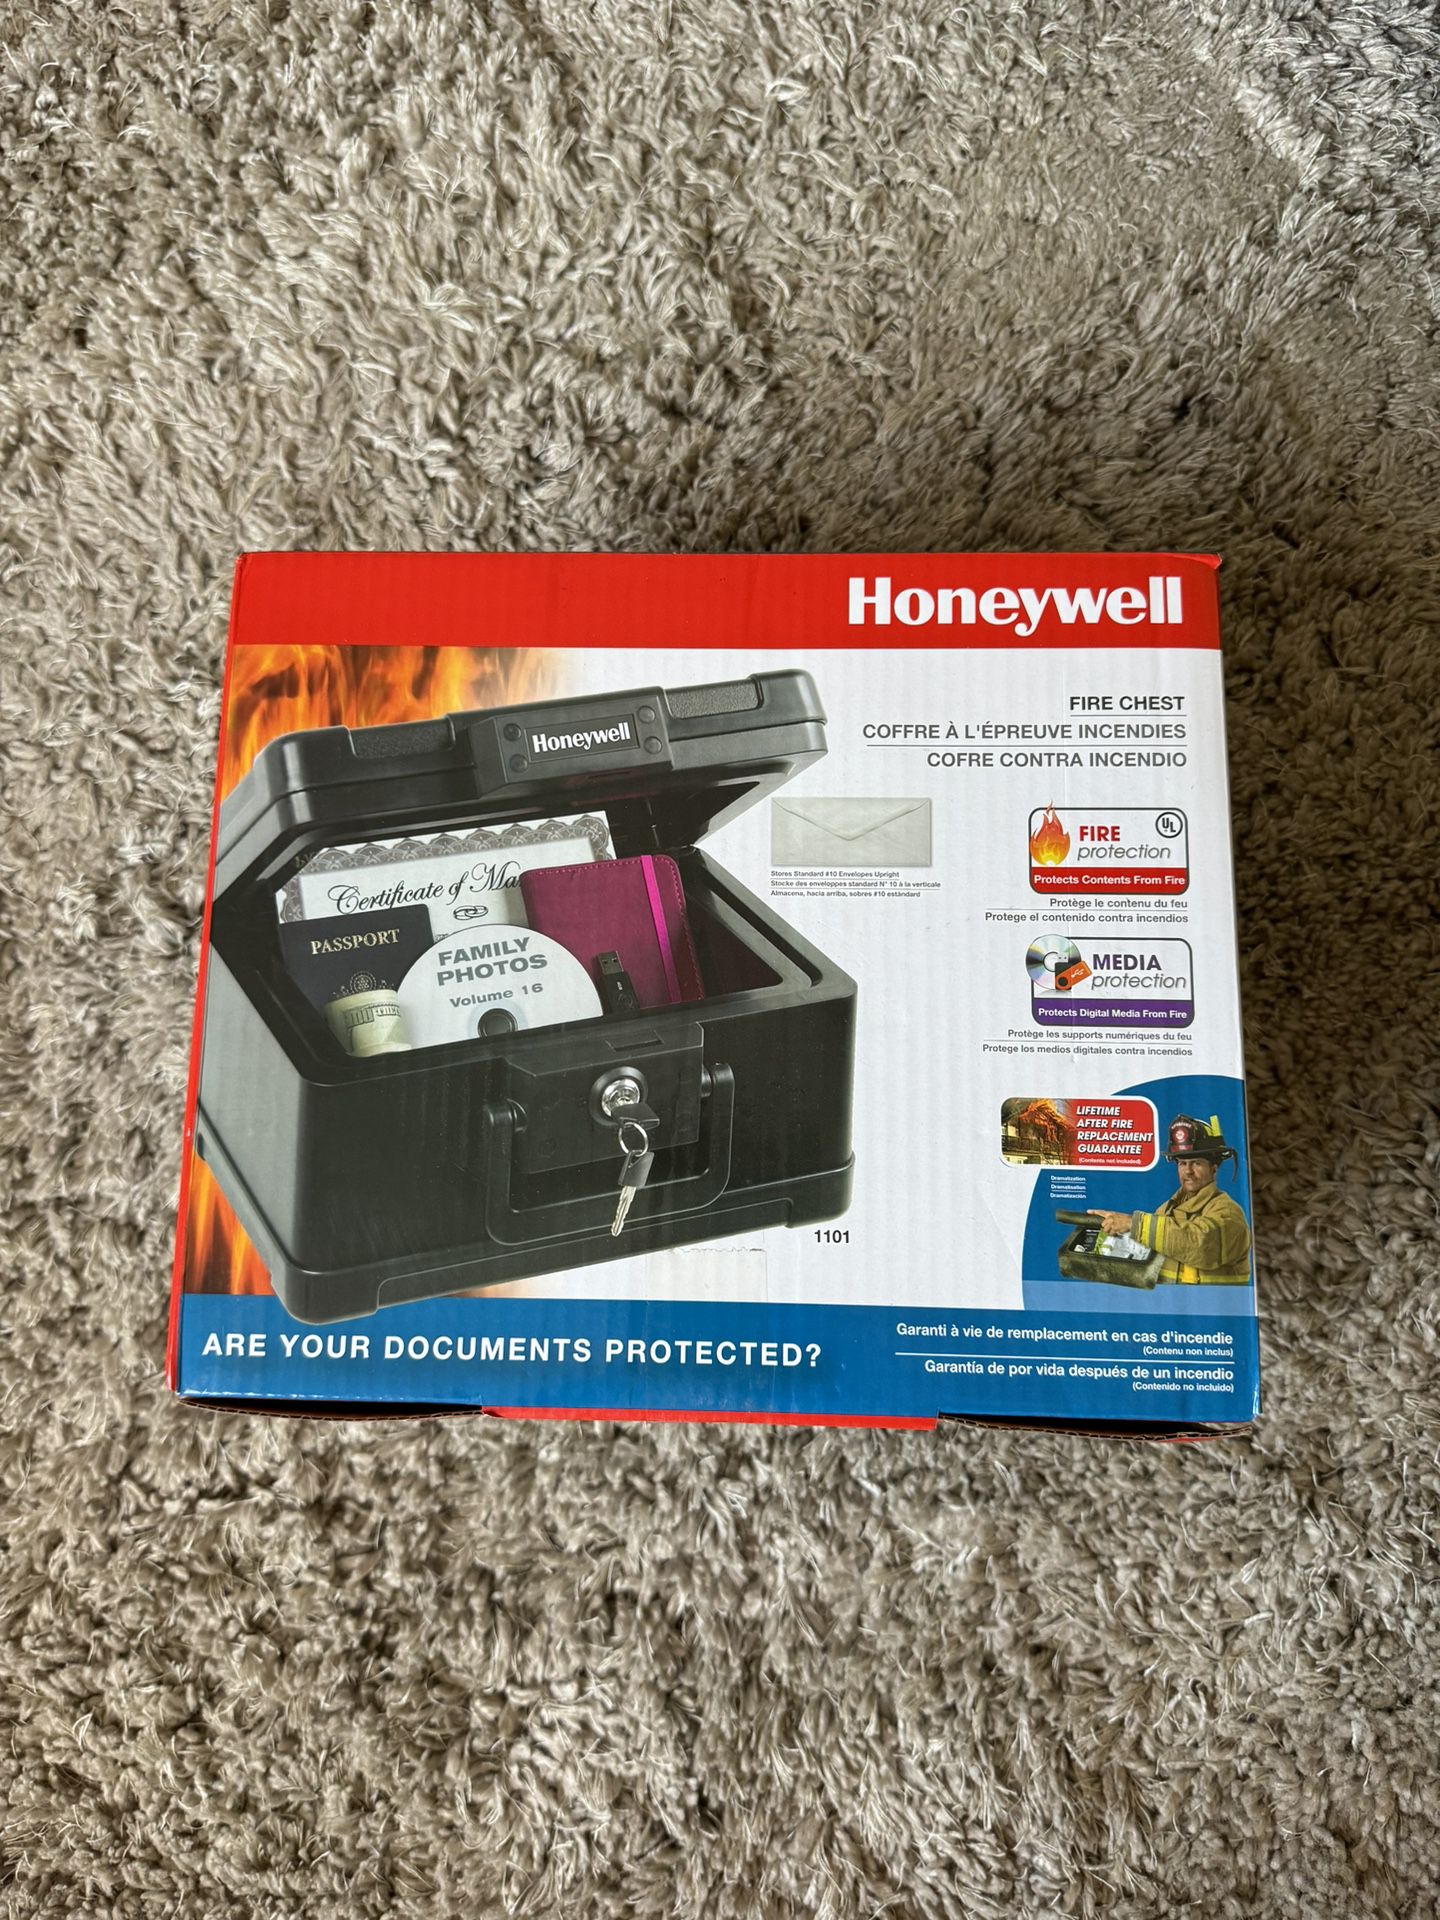 Honeywell 0.15 cu. ft. Molded Fire-Resistant Portable Chest with Carry Handle Storage Box